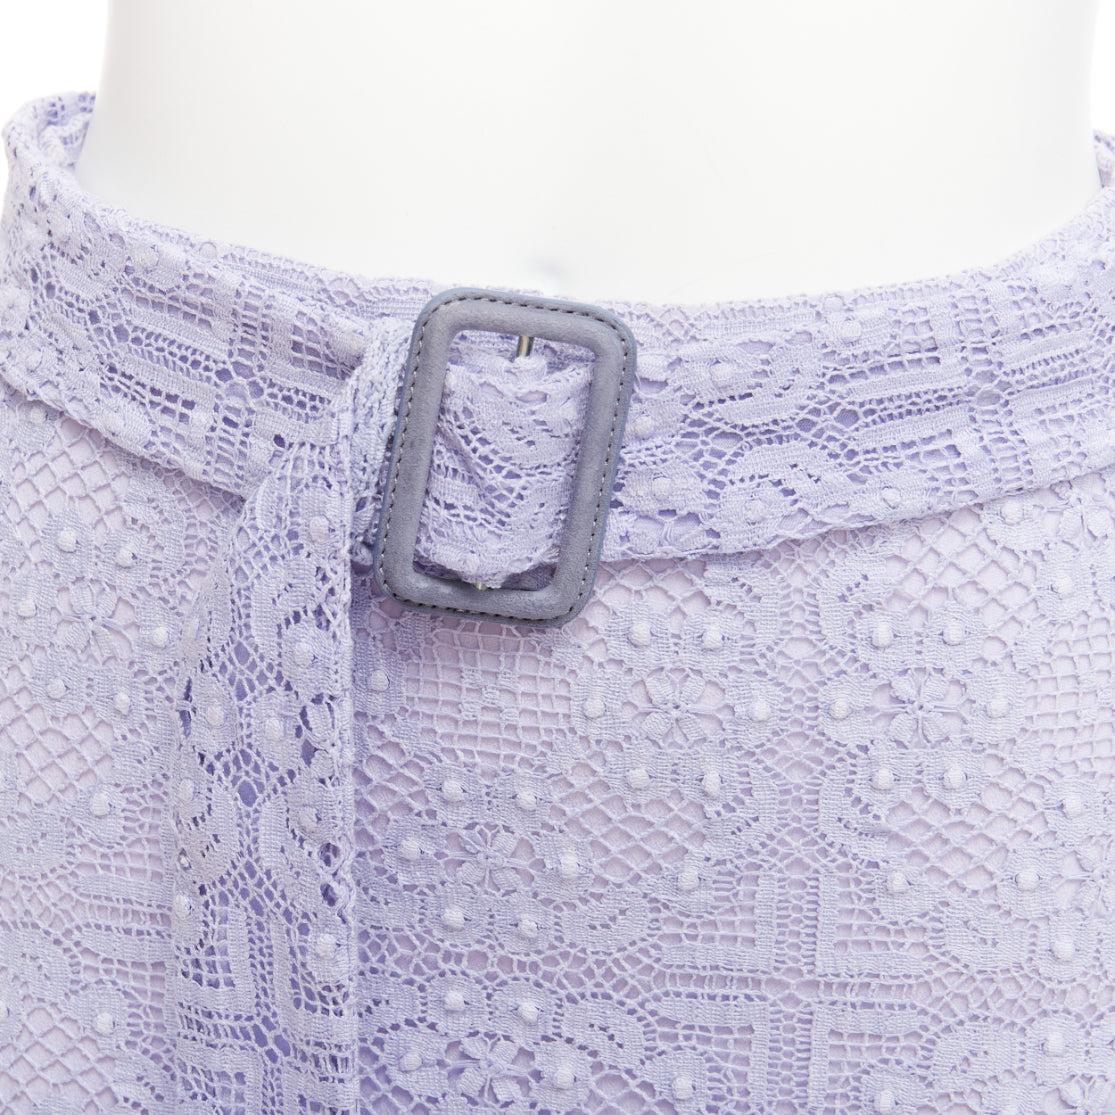 BURBERRY Runway lilac purple cotton blend lace belted pencil skirt IT36 XXS
Reference: AAWC/A00960
Brand: Burberry
Designer: Christopher Bailey
Collection: Runway
Material: Cotton, Blend
Color: Purple
Pattern: Lace
Closure: Zip
Lining: Purple